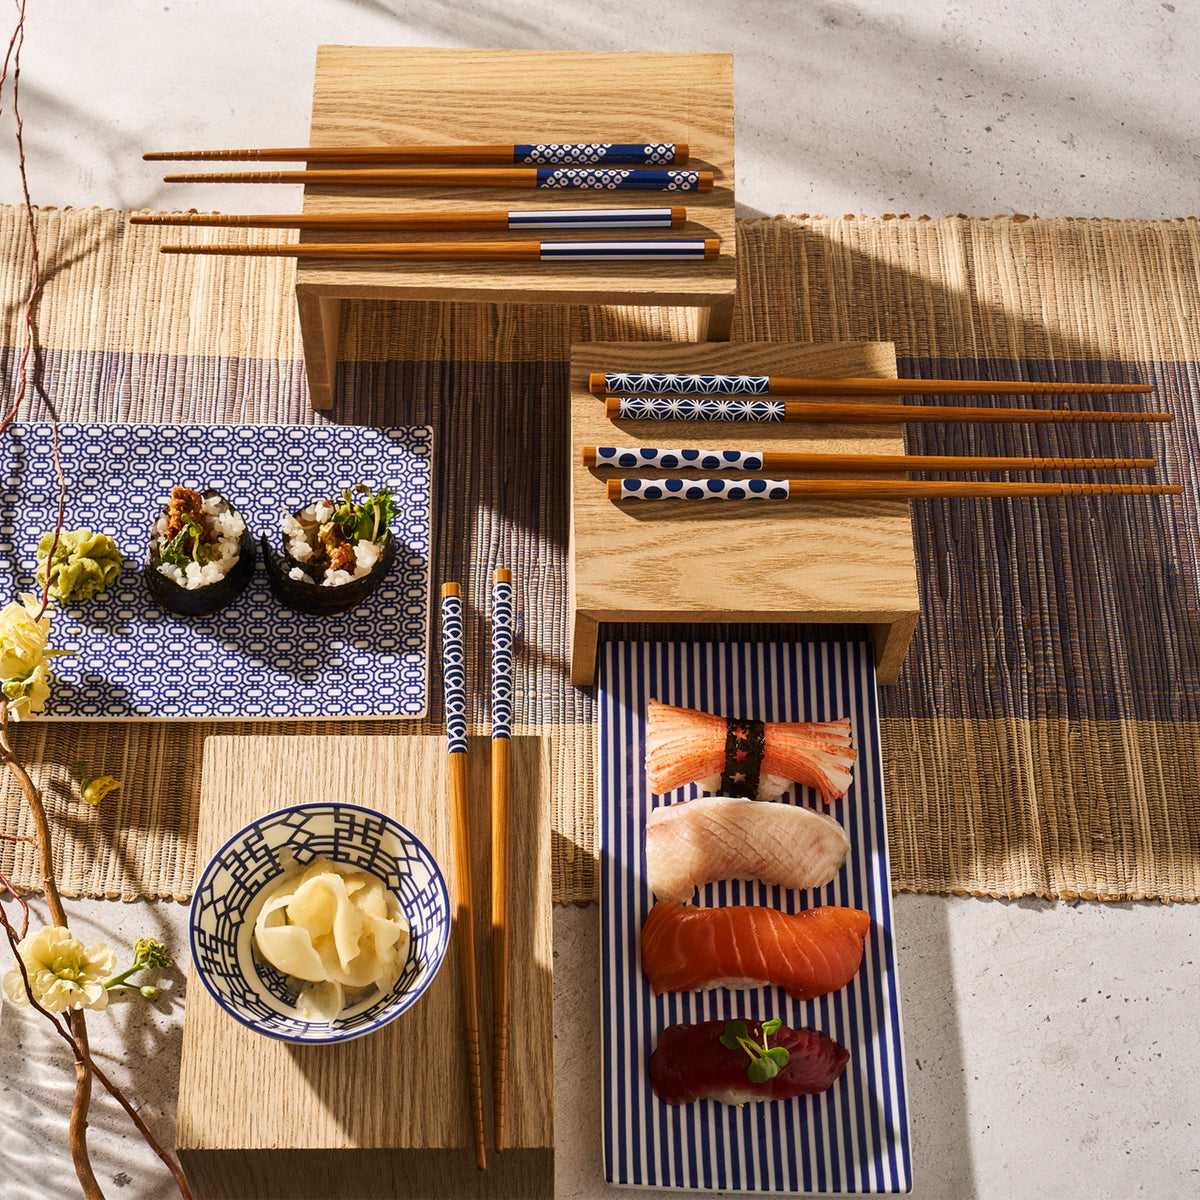 Kyoto Chopsticks from Miya, Inc. and utensils on a wooden tray.